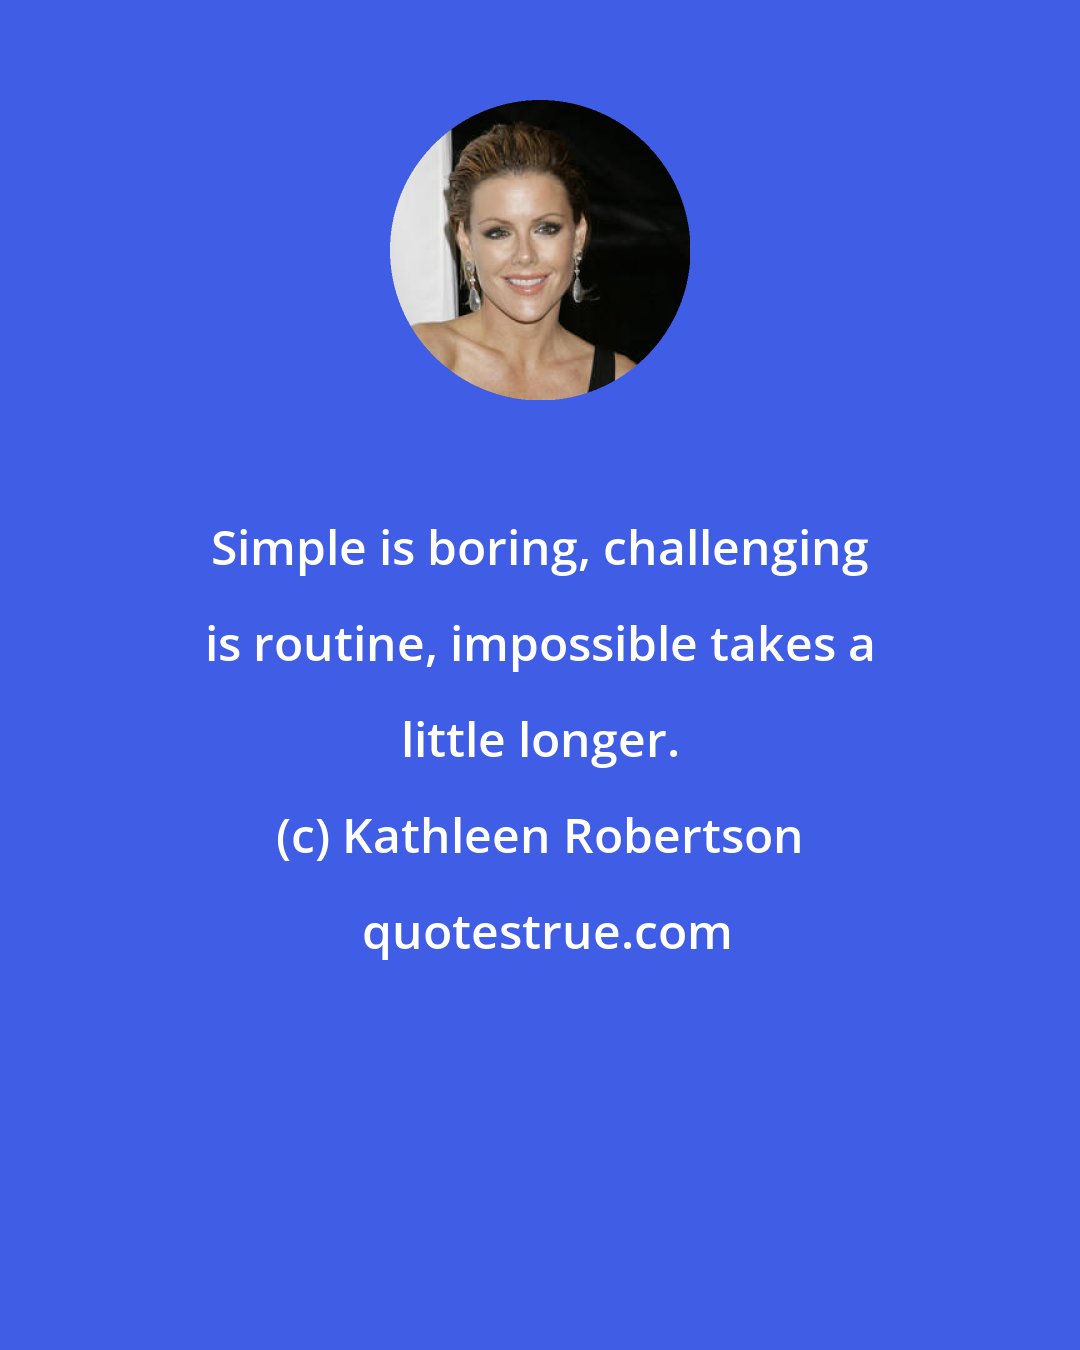 Kathleen Robertson: Simple is boring, challenging is routine, impossible takes a little longer.